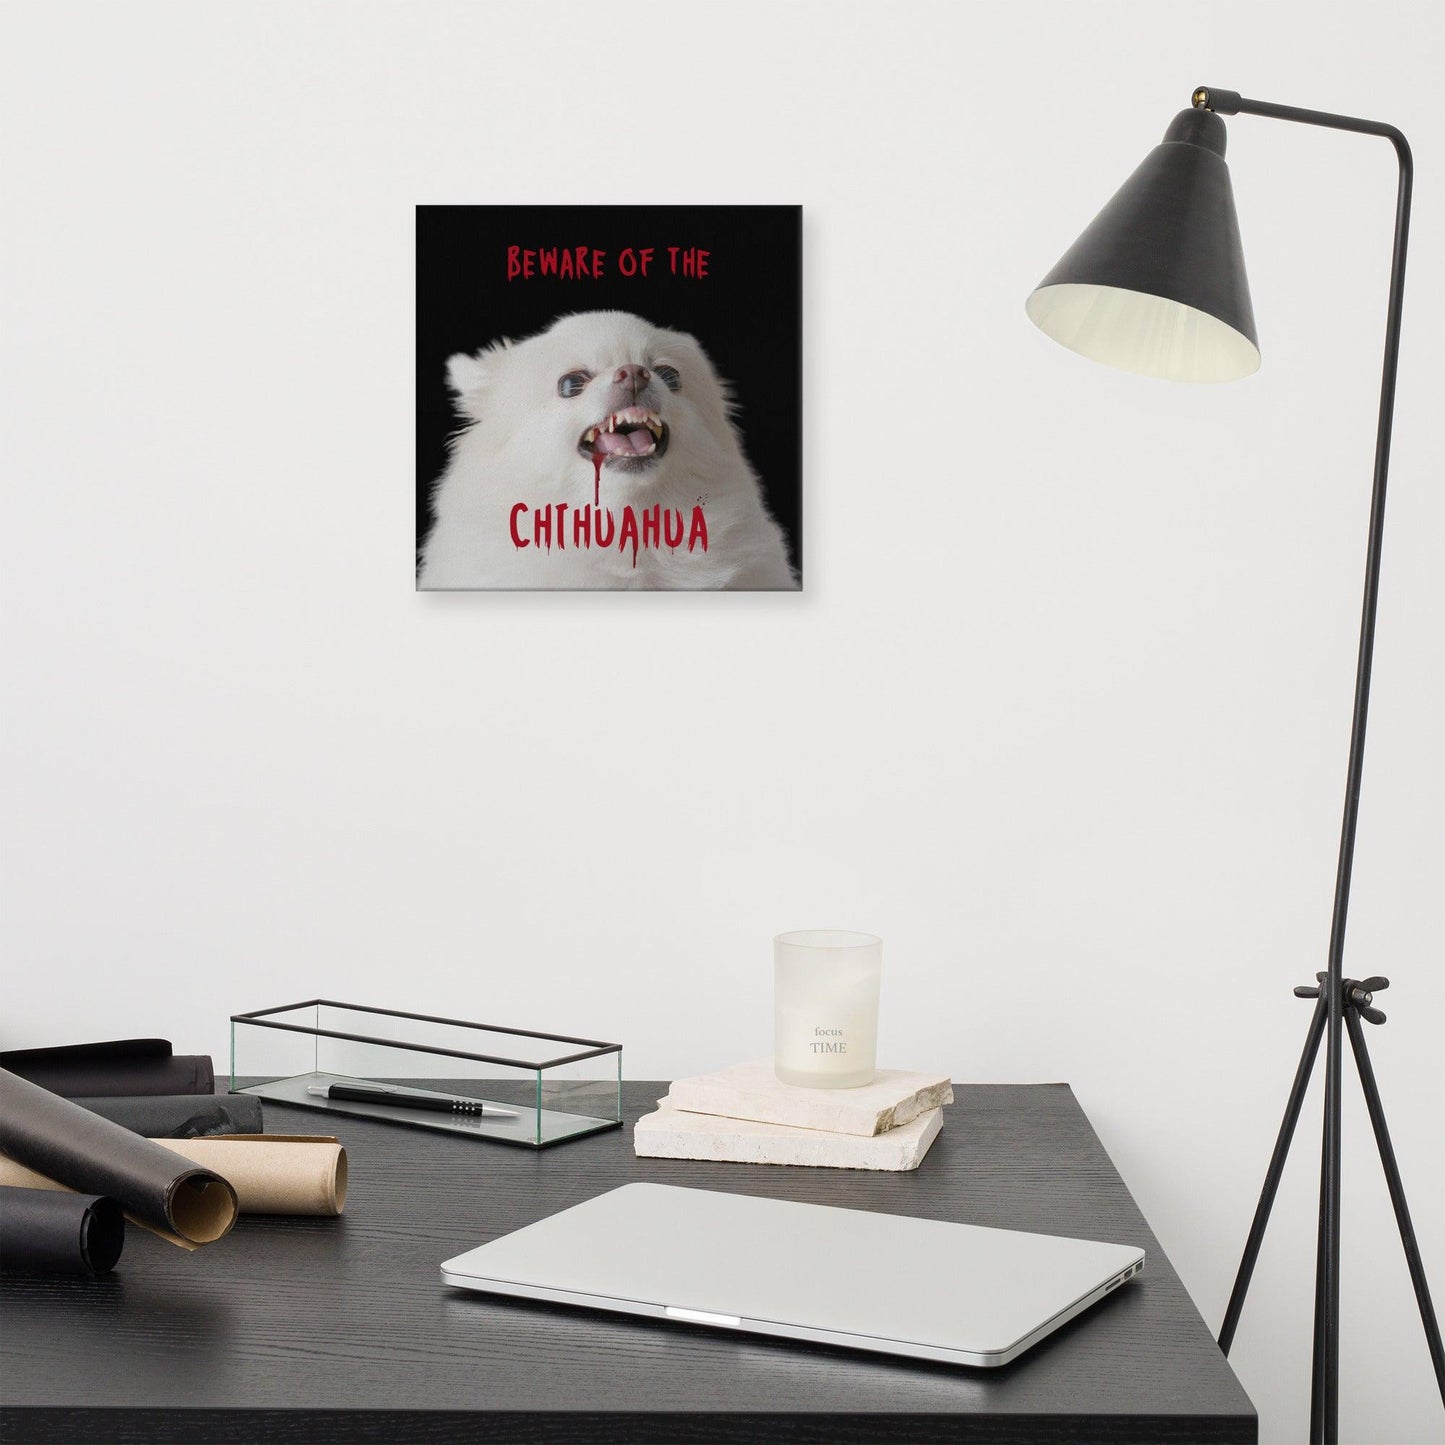 BEWARE OF THE CHIHUAHUA - one of the famous Chimigos chihuahua memes. This is a vivid and fade resistant art print on a stretched canvas. An angelic fluffy white chihuahua with bloody fangs reminds us that looks can be deceiving. Beware of the chihuahua! A punky gift idea for someone whose house is guarded by a cute but vicious little chi. Perfect for the new chihuahua parent, as a housewarming gift, or maybe for Halloween!